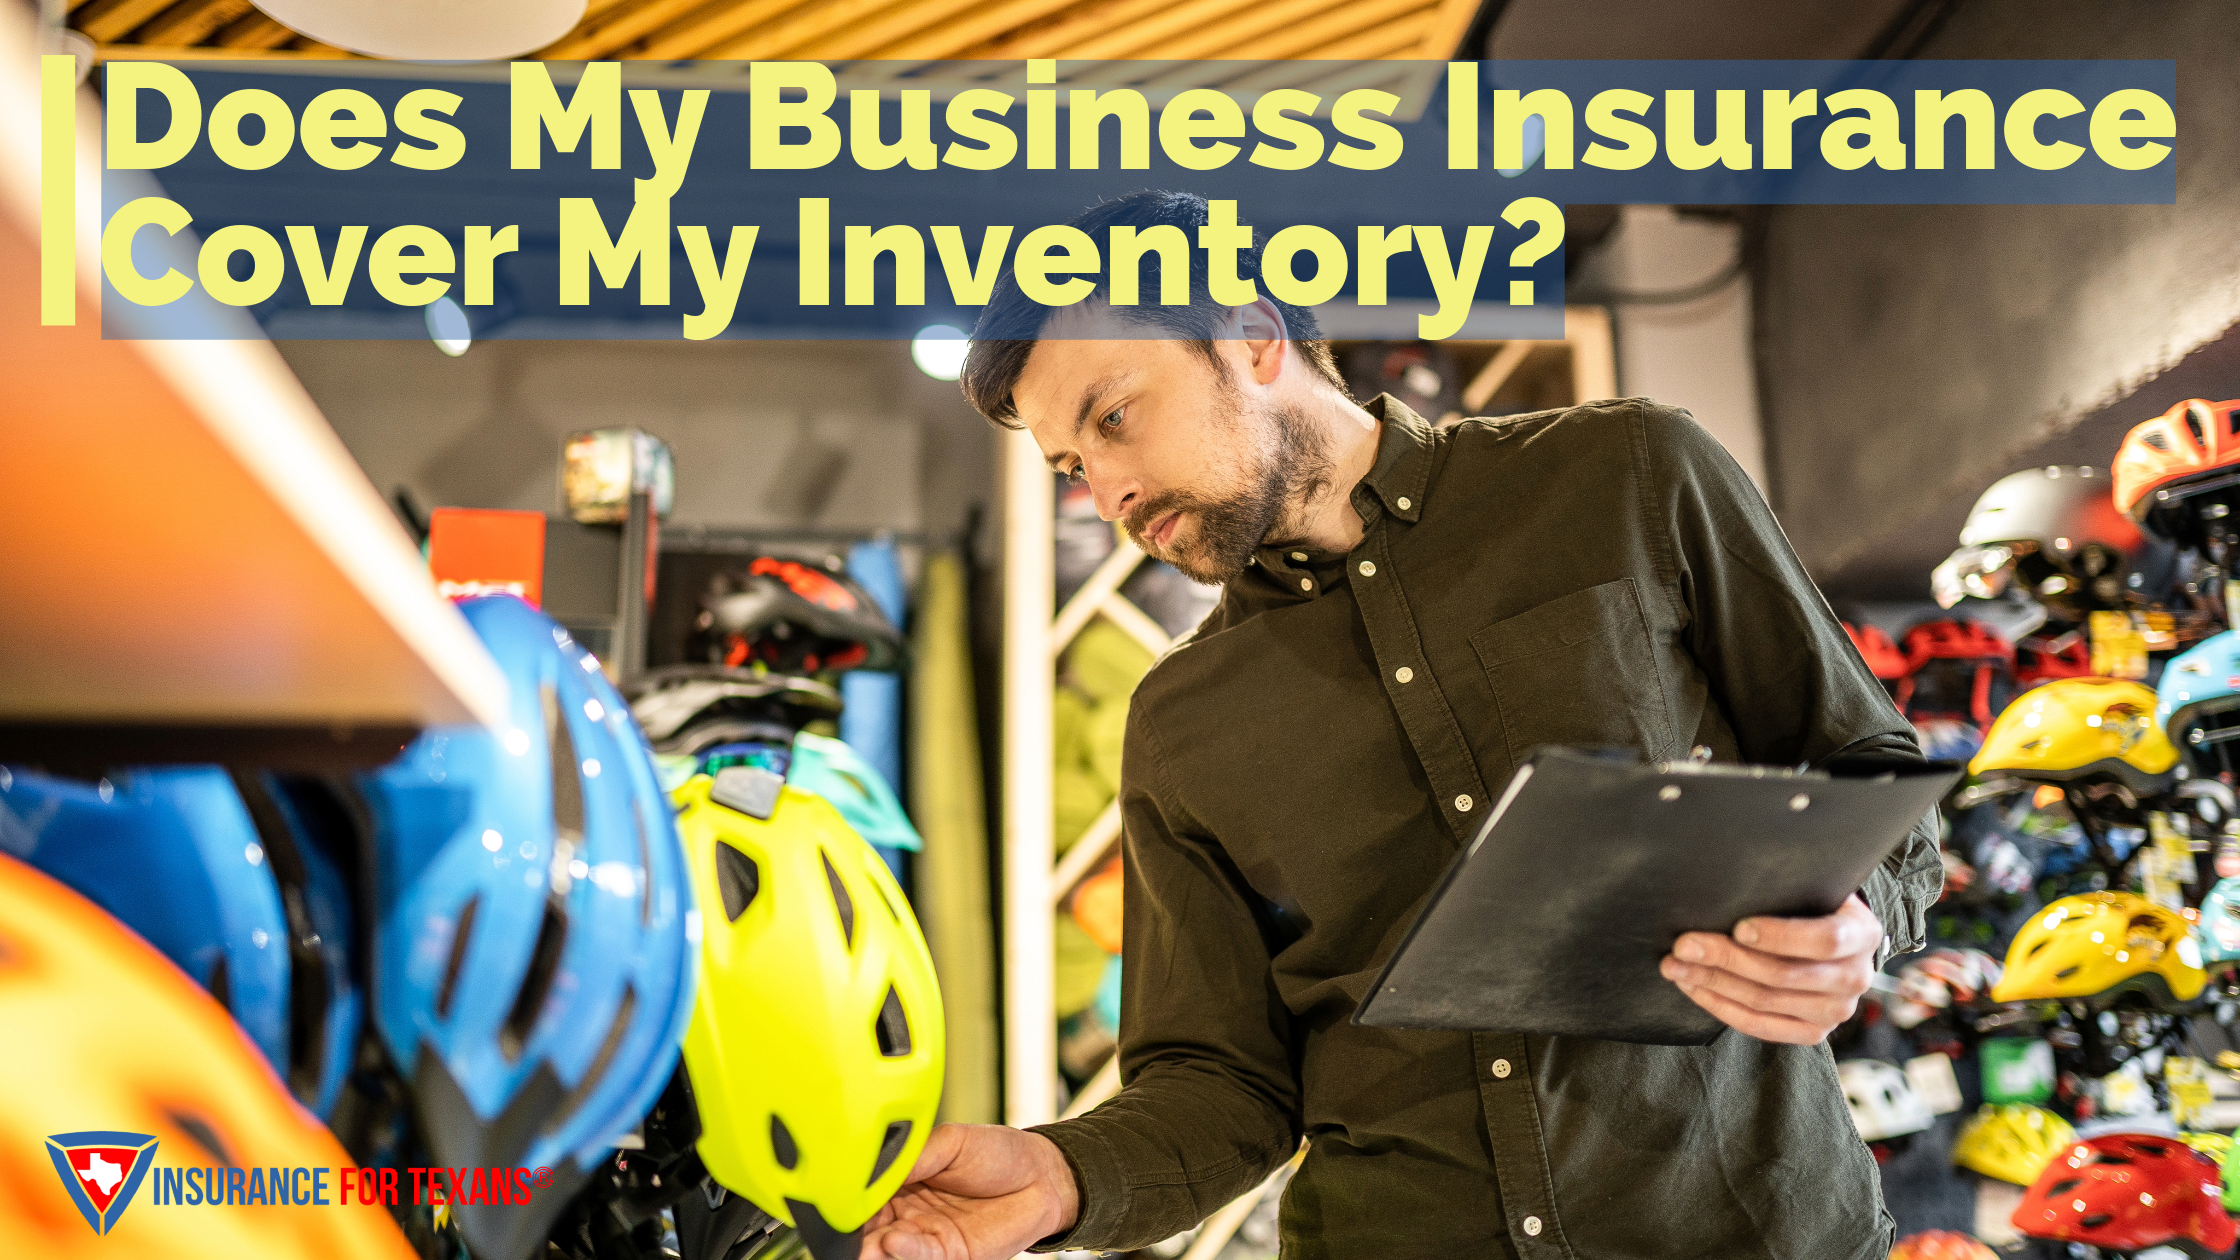 Does My Business Insurance Cover My Inventory?